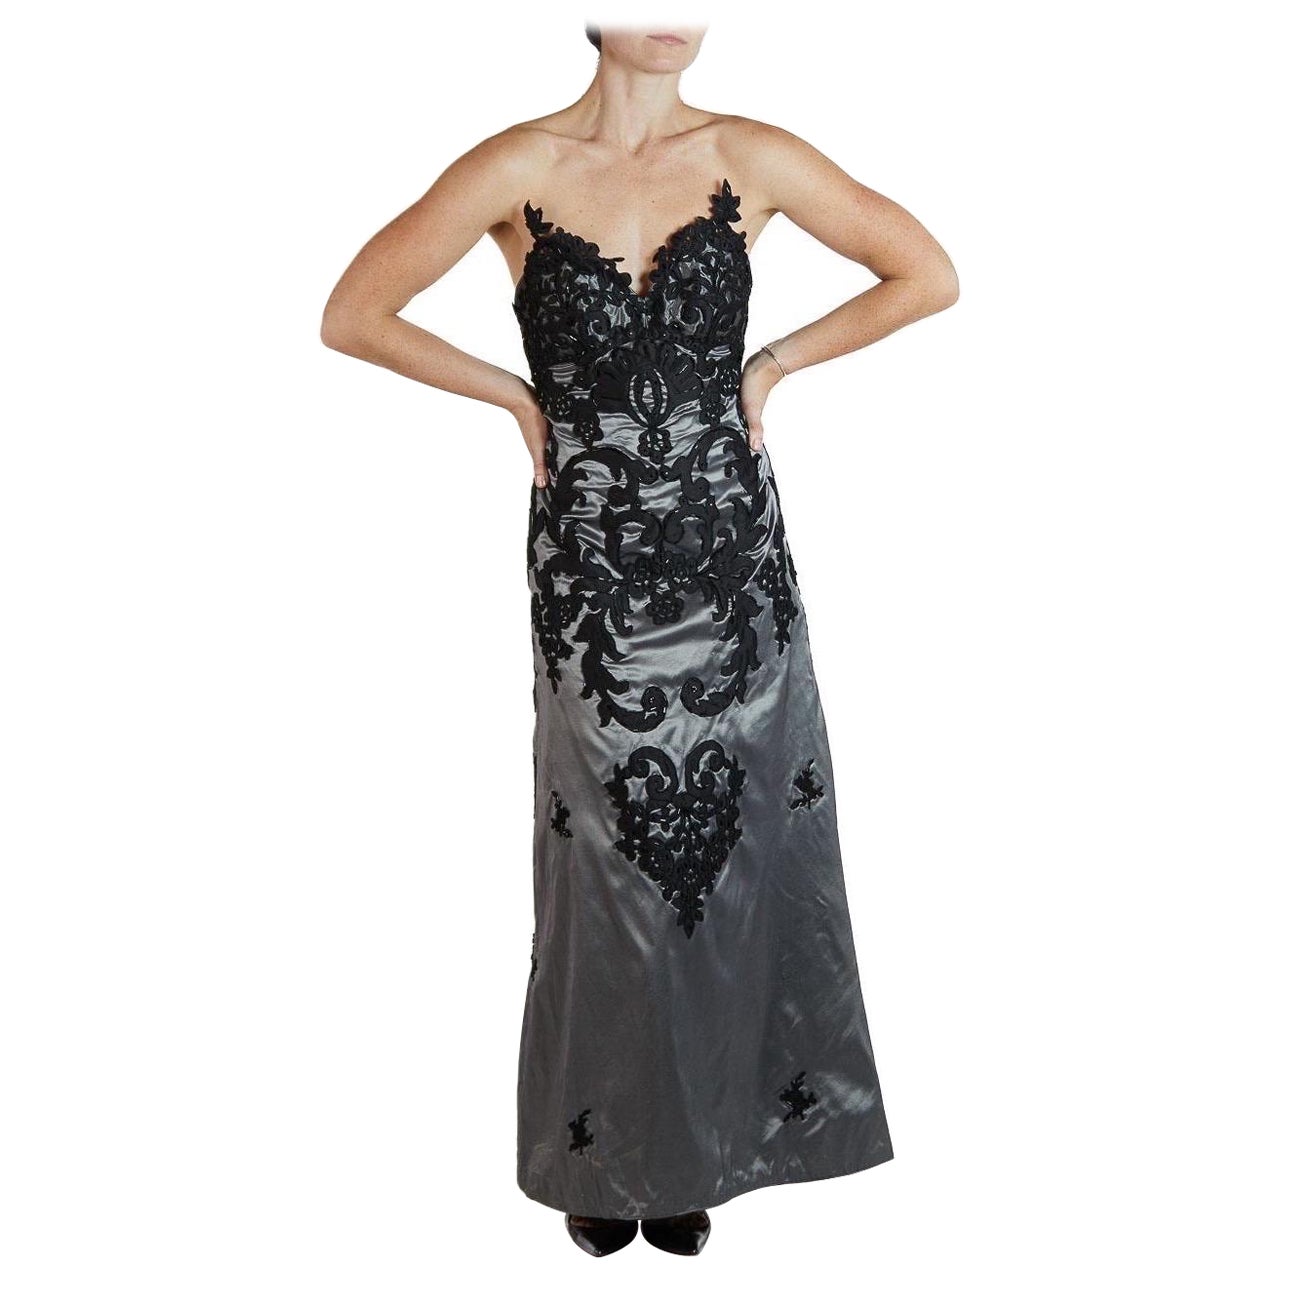 1980S Black Metallic Rayon/Lurex Strapless Gown With Baroque Appliqués For Sale